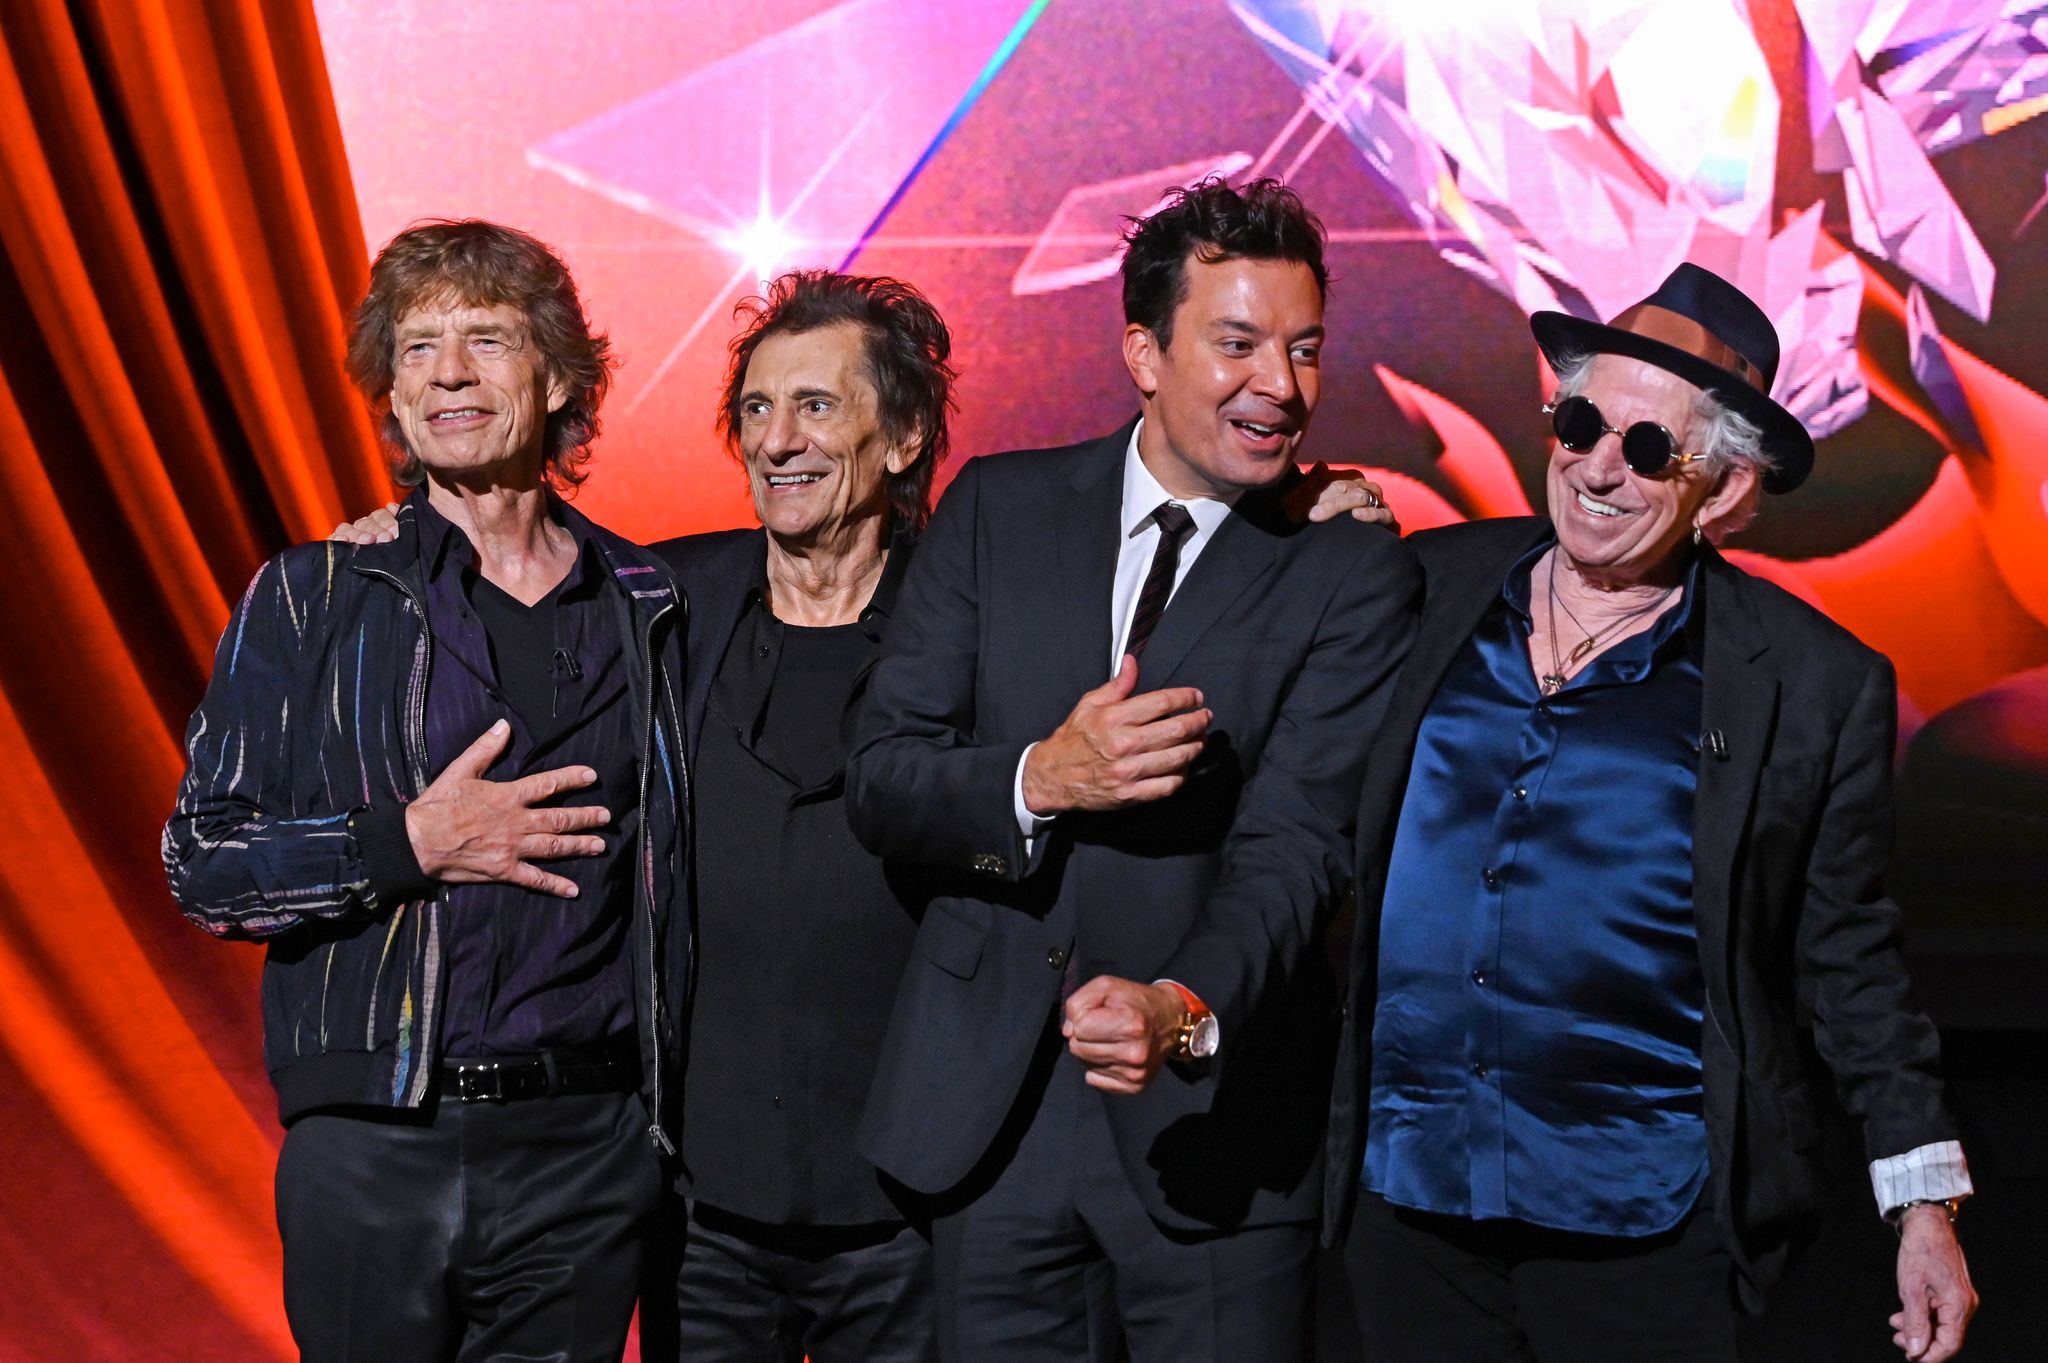 london, england september 06 mick jagger, ronnie wood, jimmy fallon and keith richards pose for photographs during the rolling stones hackney diamonds press conference at hackney empire on september 06, 2023 in london, england photo by stuart c wilsongetty images